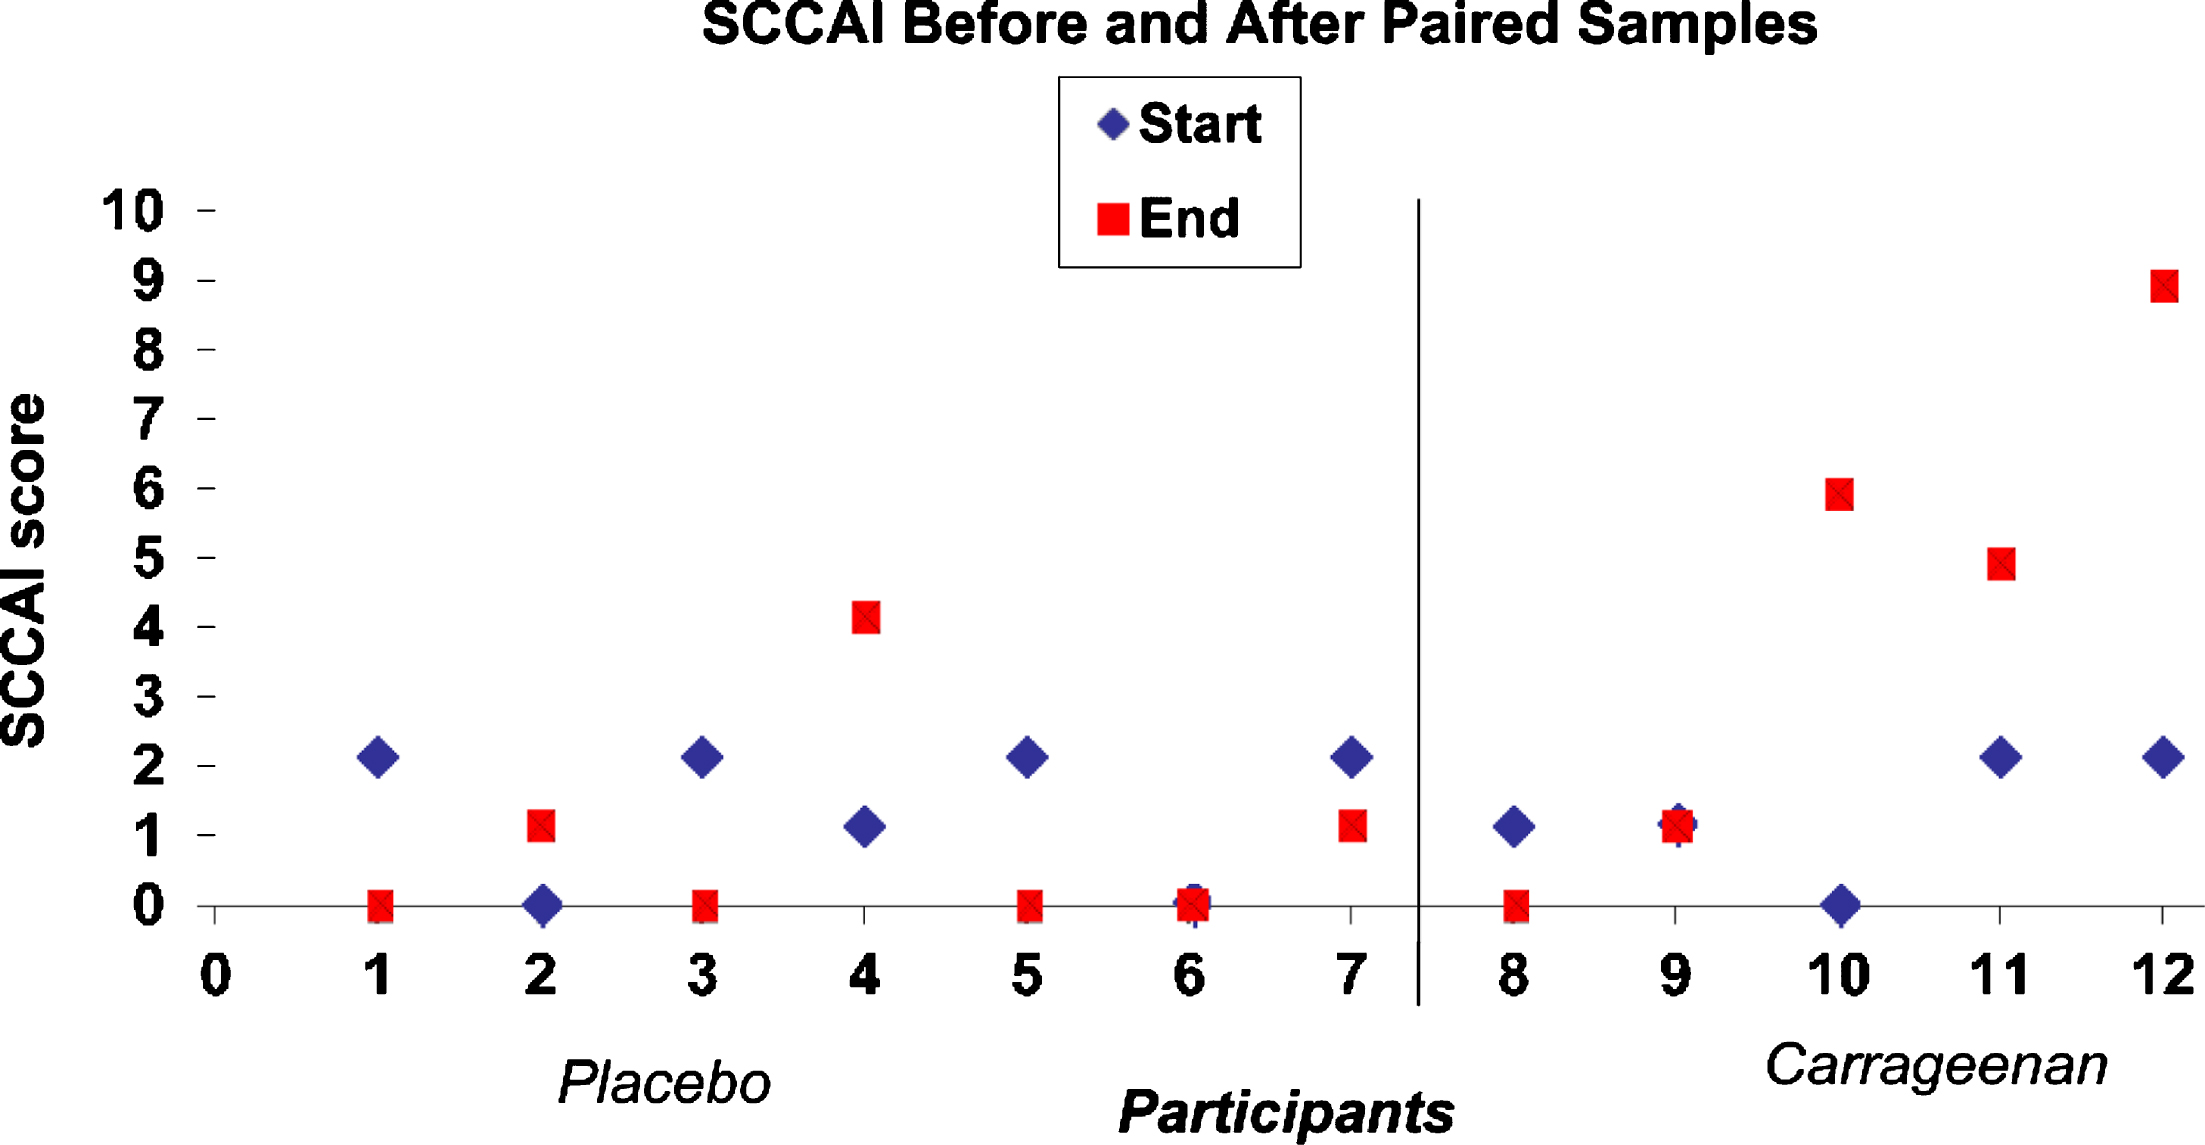 SCCAI Before and After Paired Samples.